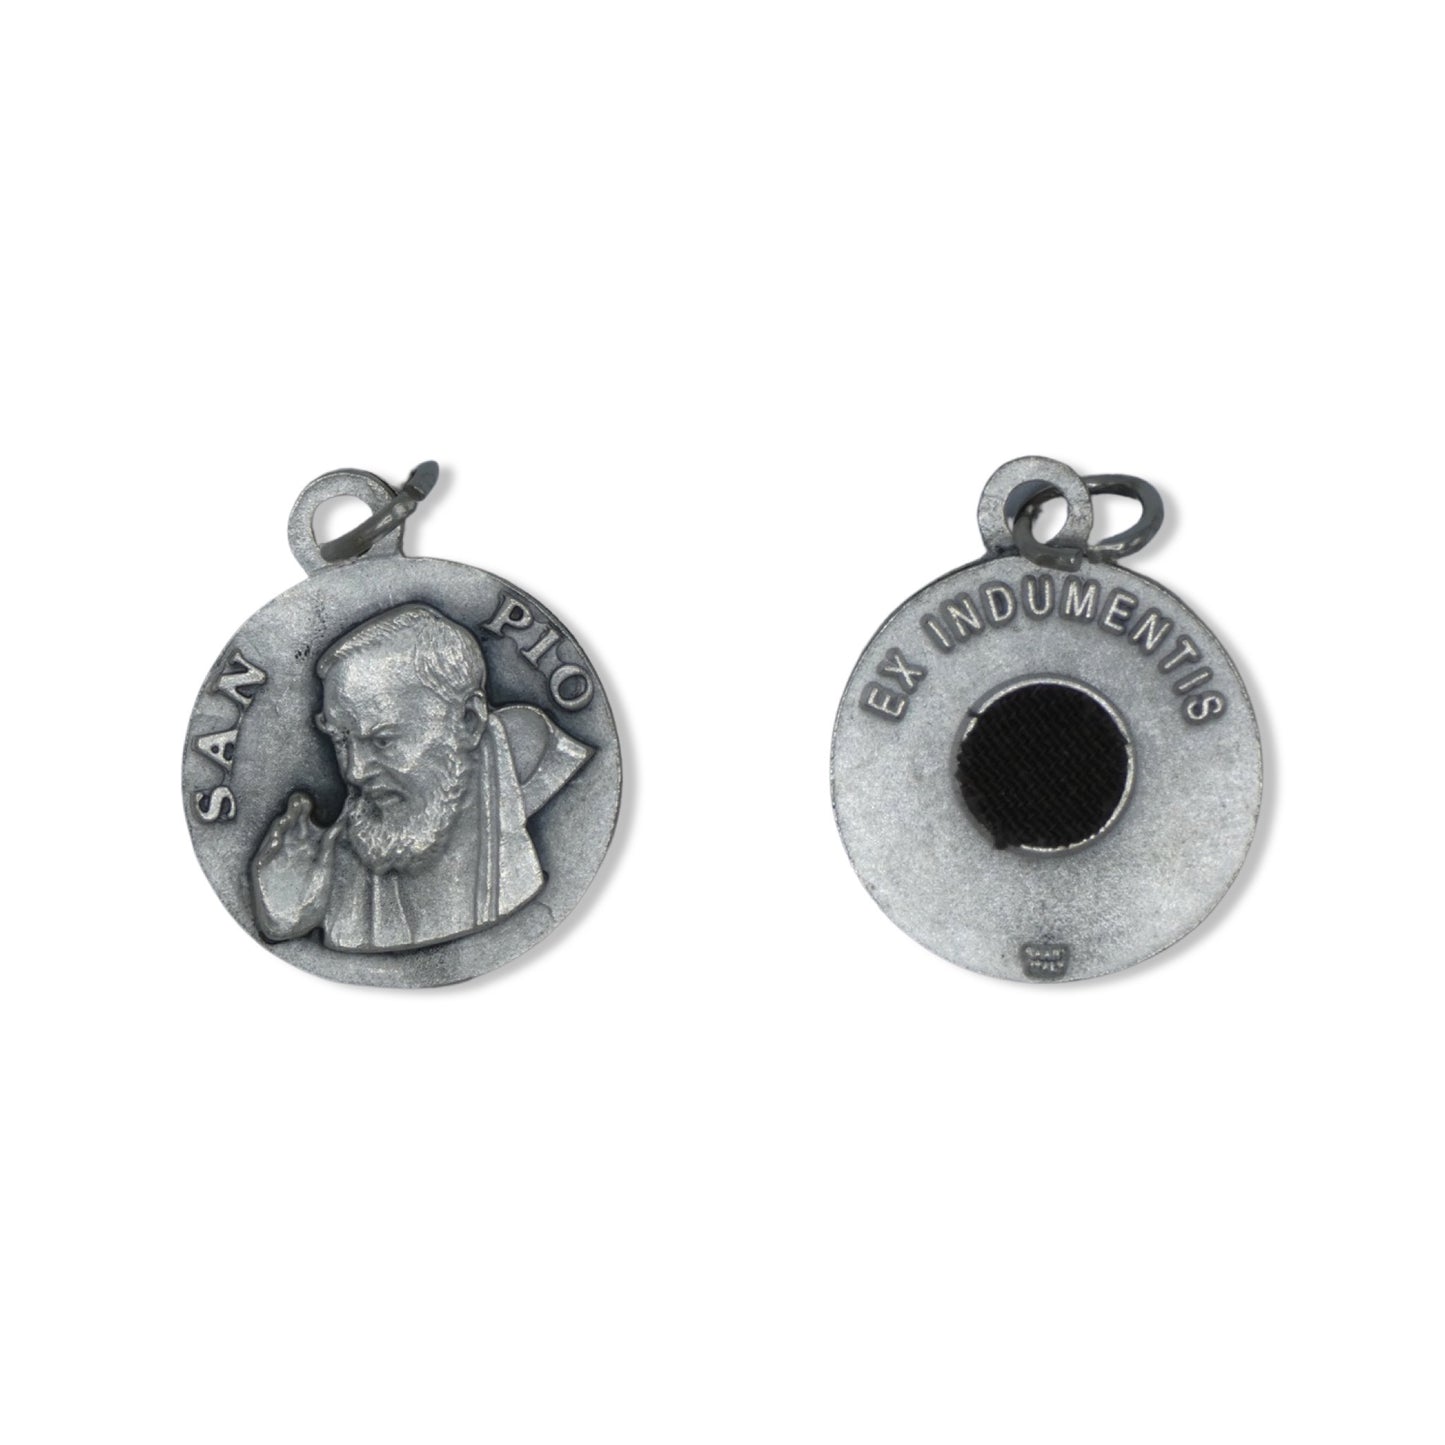 Circle Padre Pio Medal with Relic